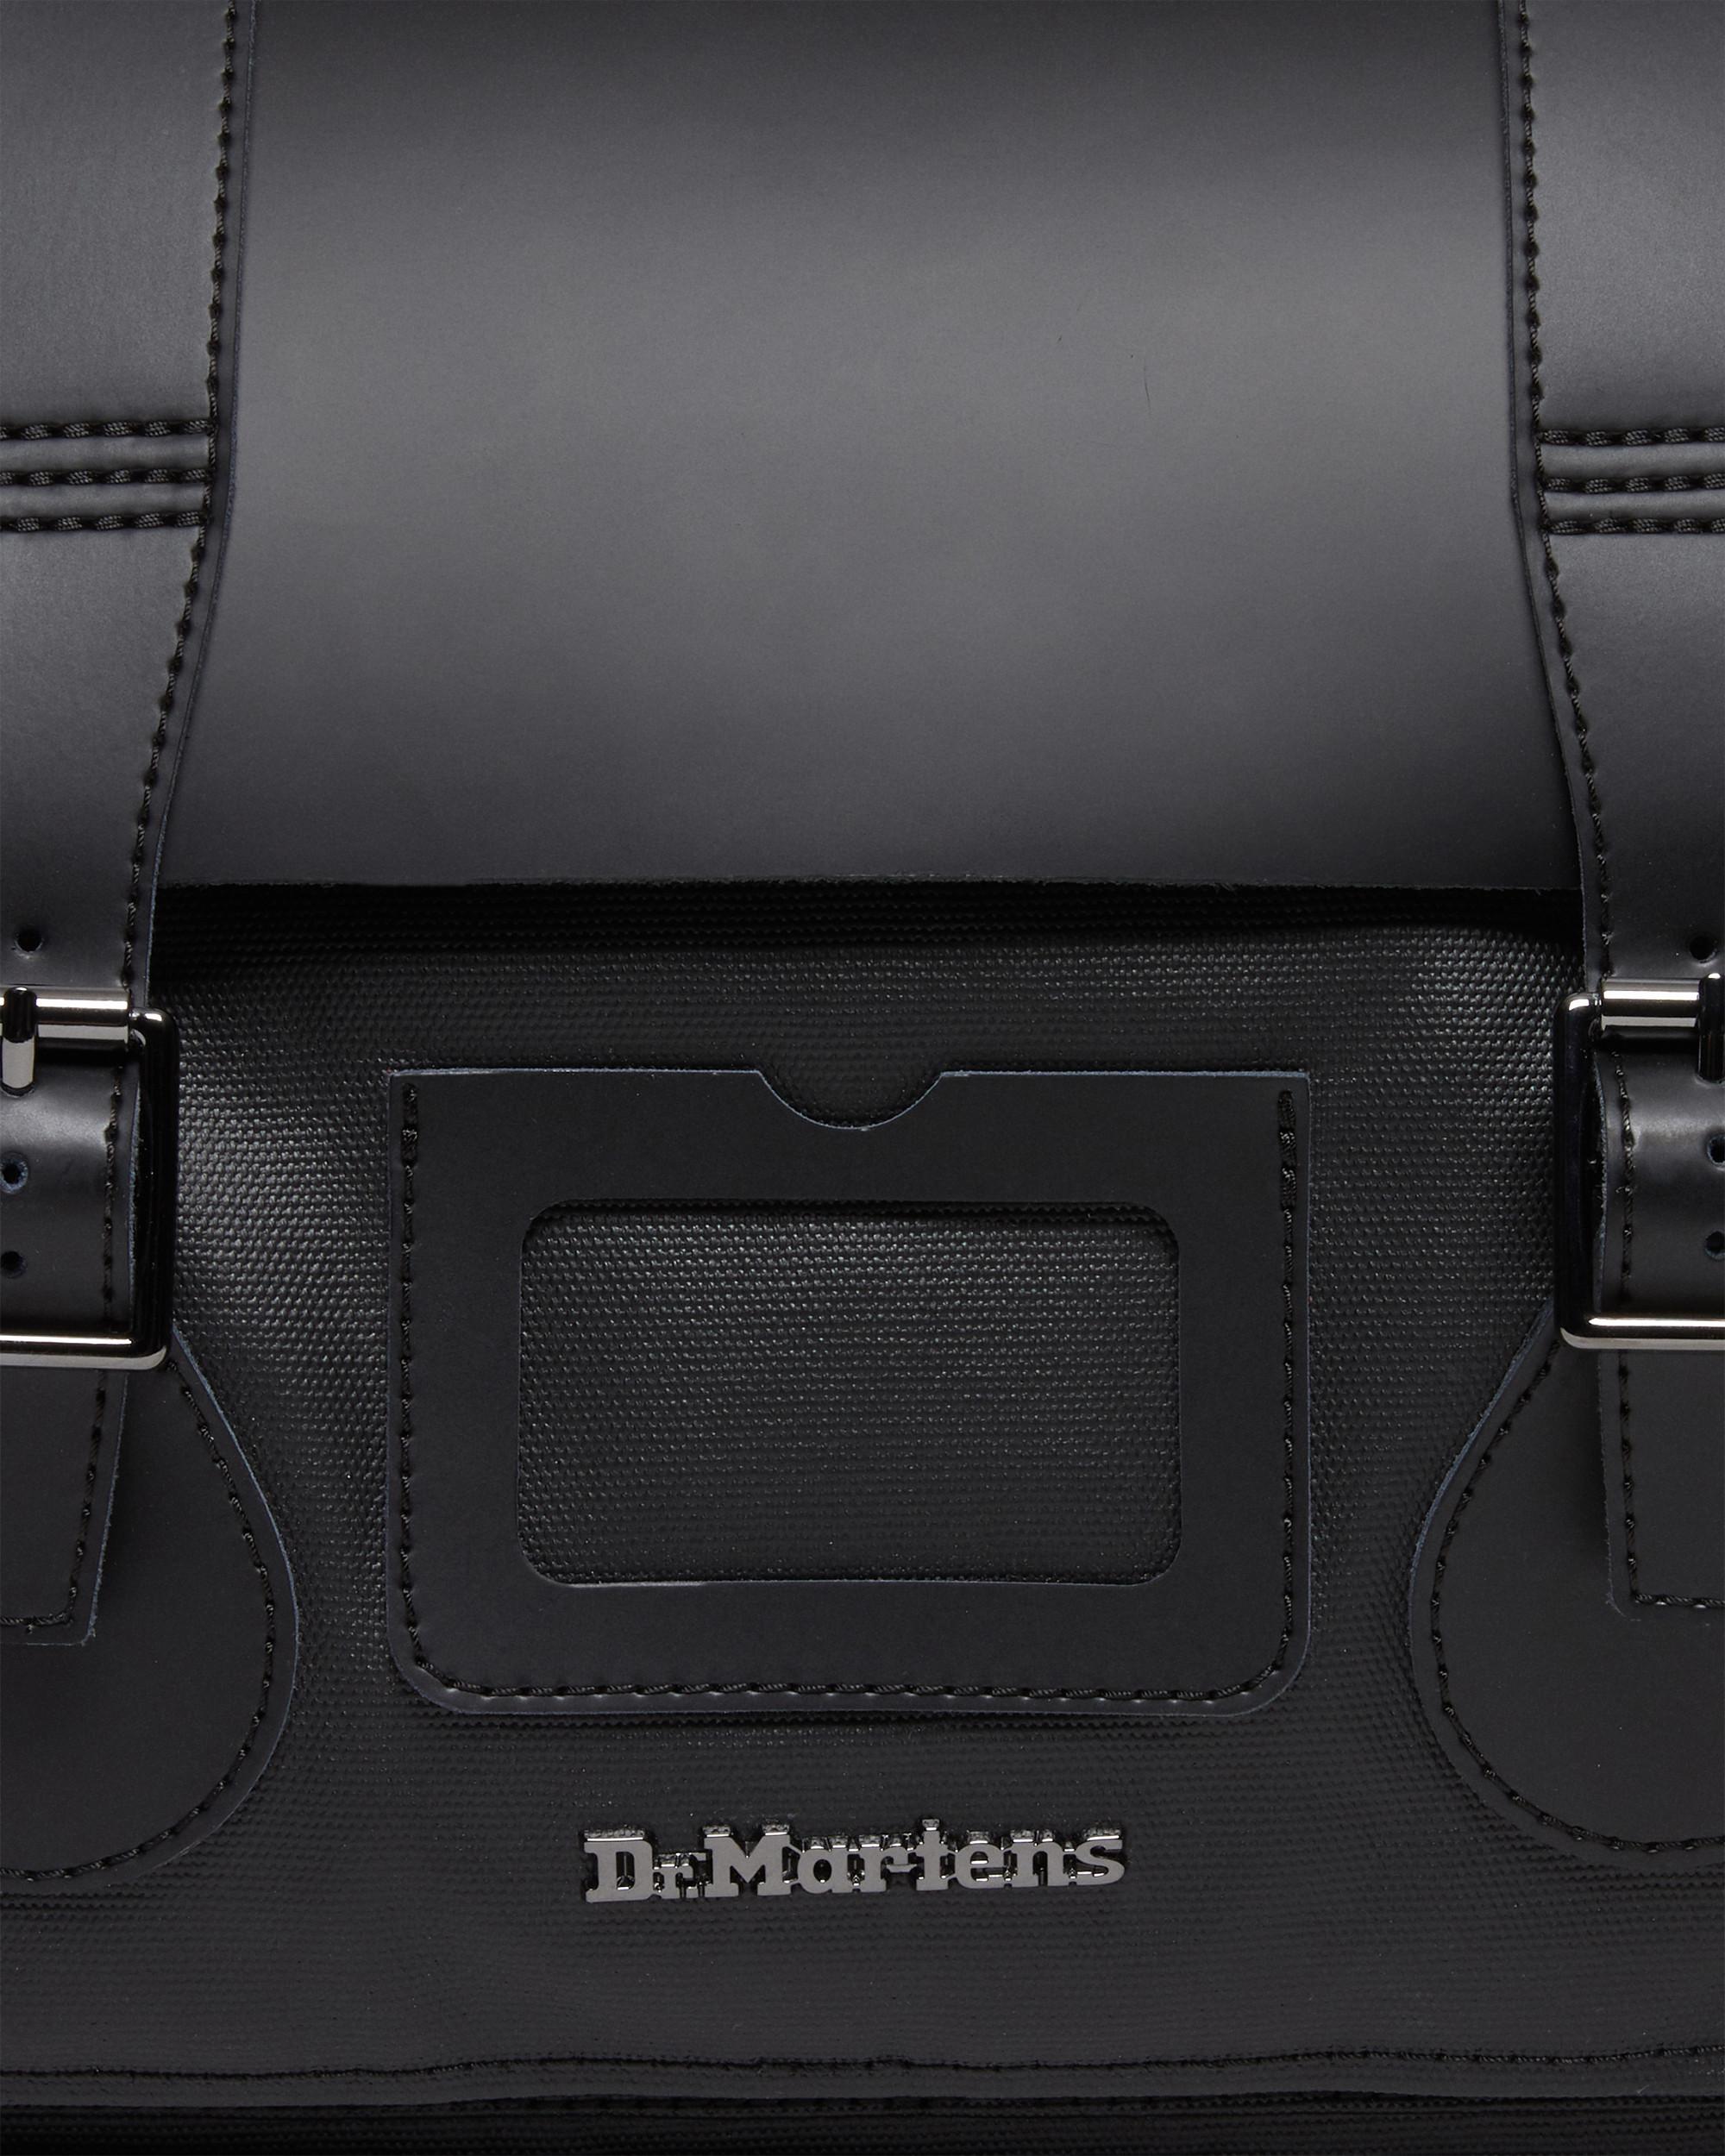 Whats in my Dr.Martens messenger bag 